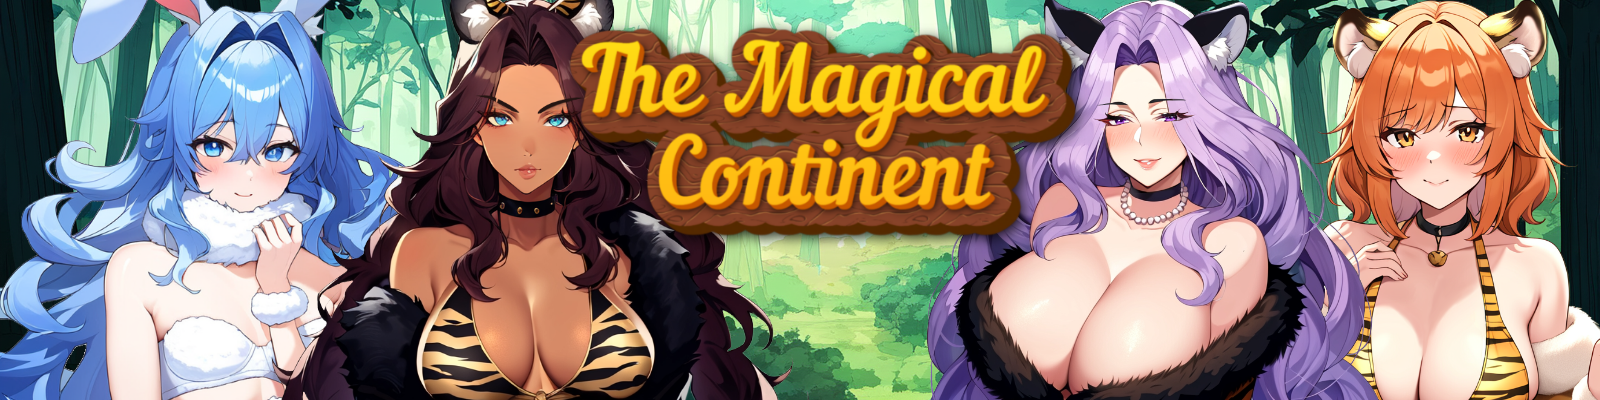 The magical continent - Download version